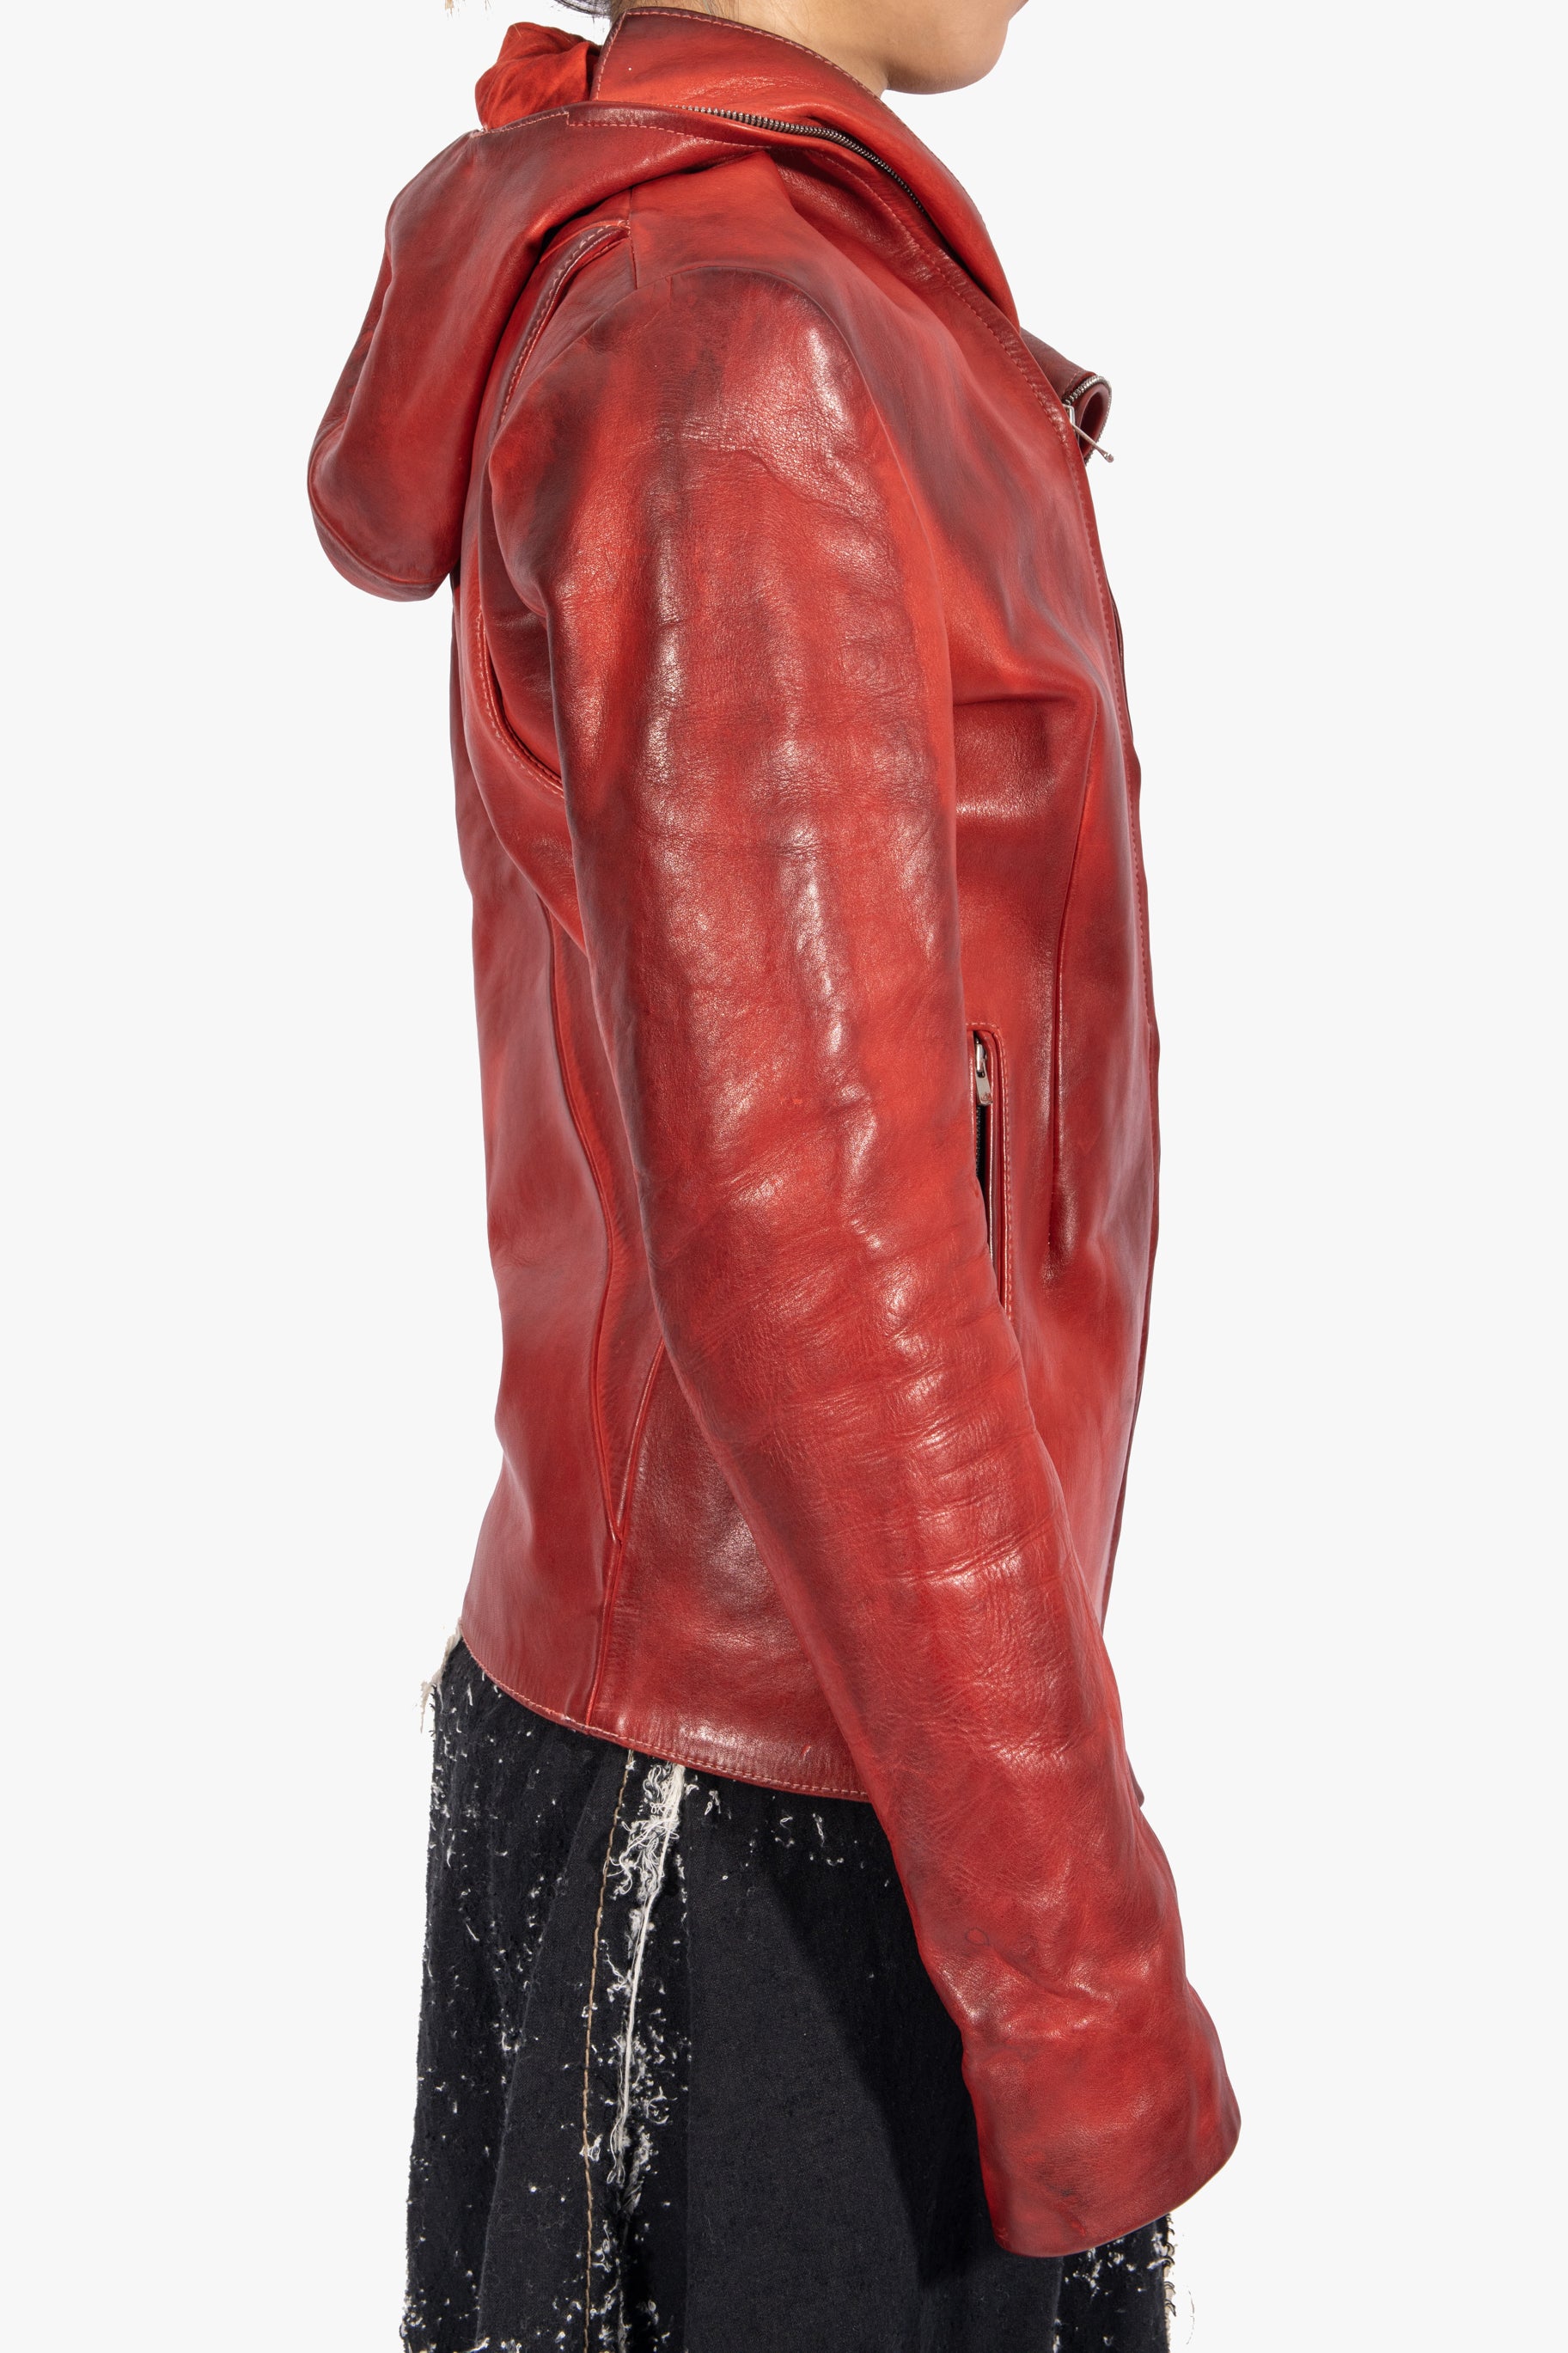 JL6904 Hooded Red Leather Jacket